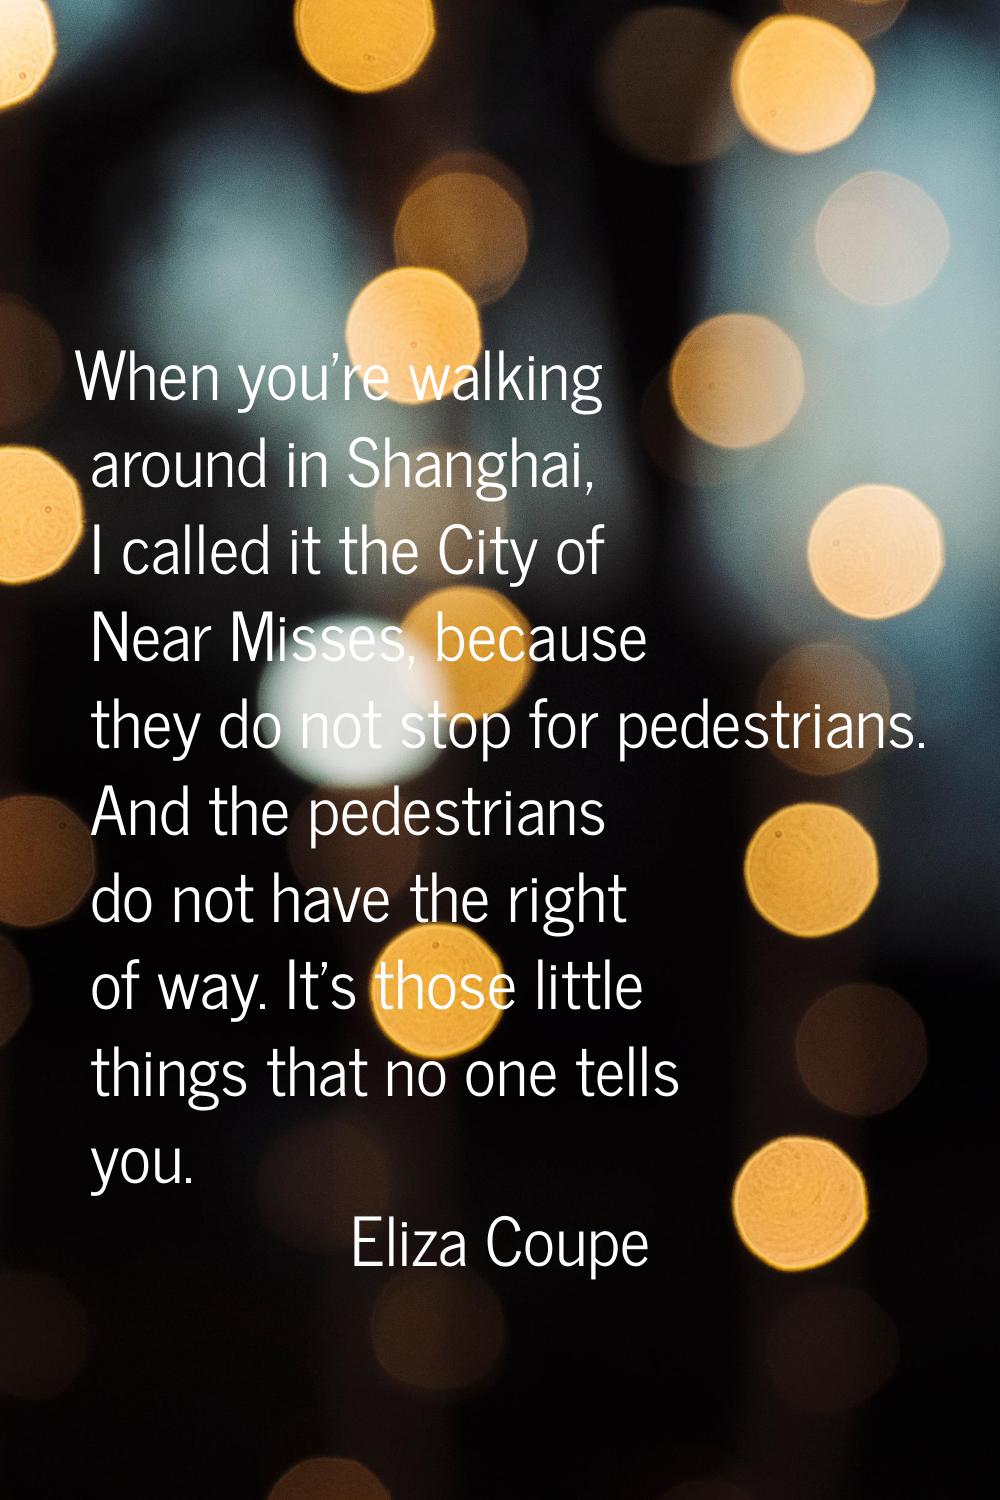 When you're walking around in Shanghai, I called it the City of Near Misses, because they do not st